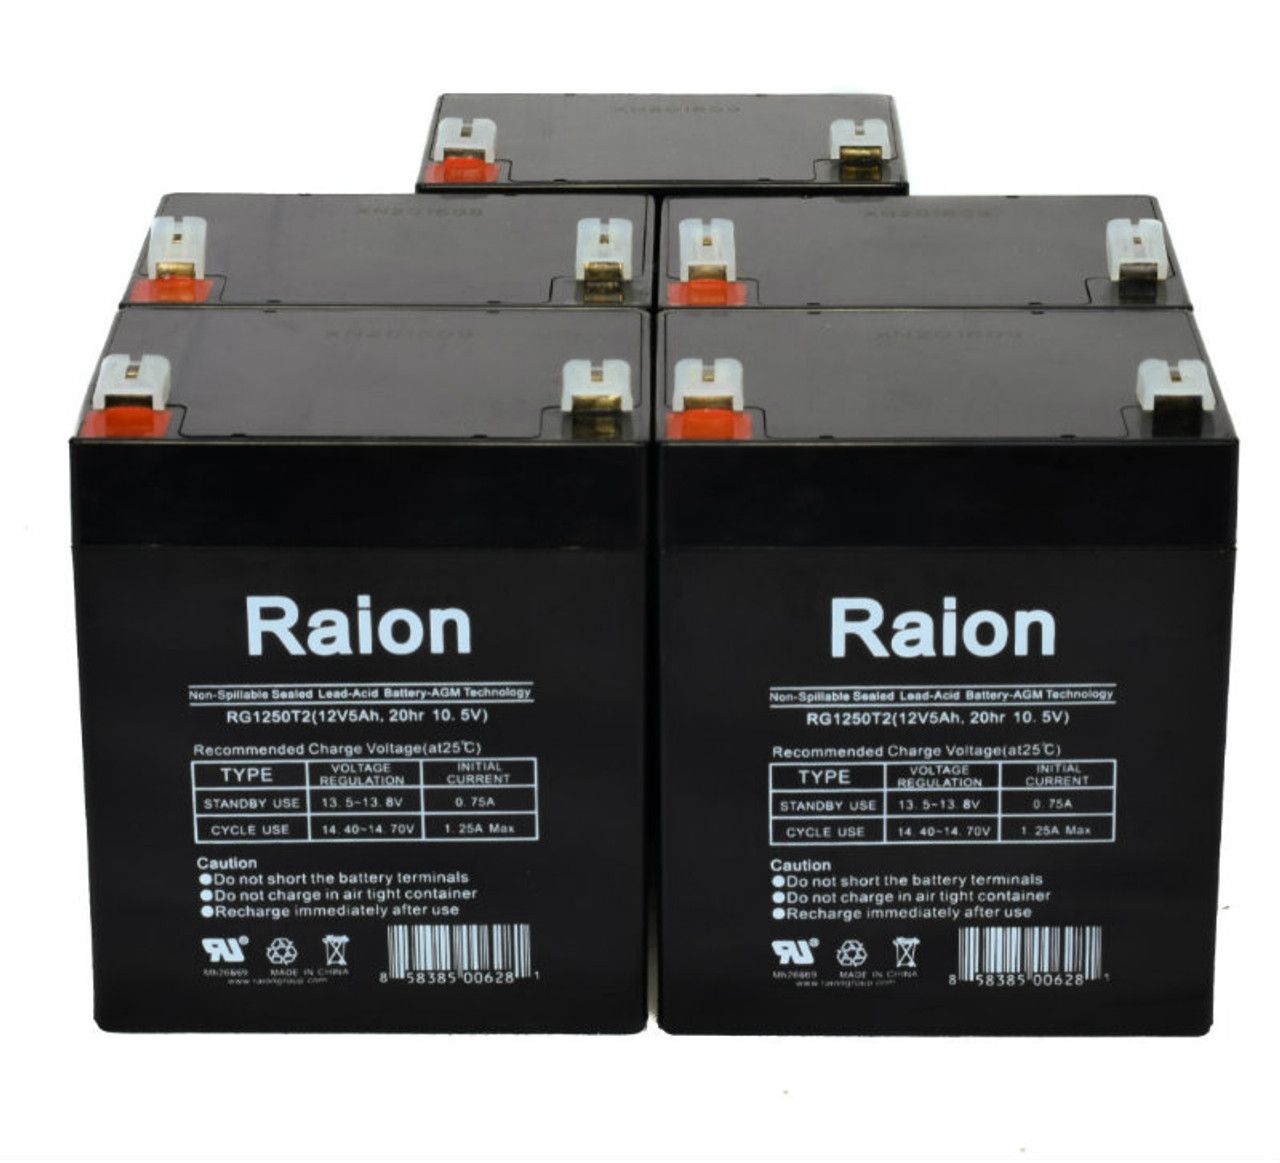 Raion Power RG1250T1 Replacement Battery for Fengri 6-FM-4.5 F1 - (5 Pack)